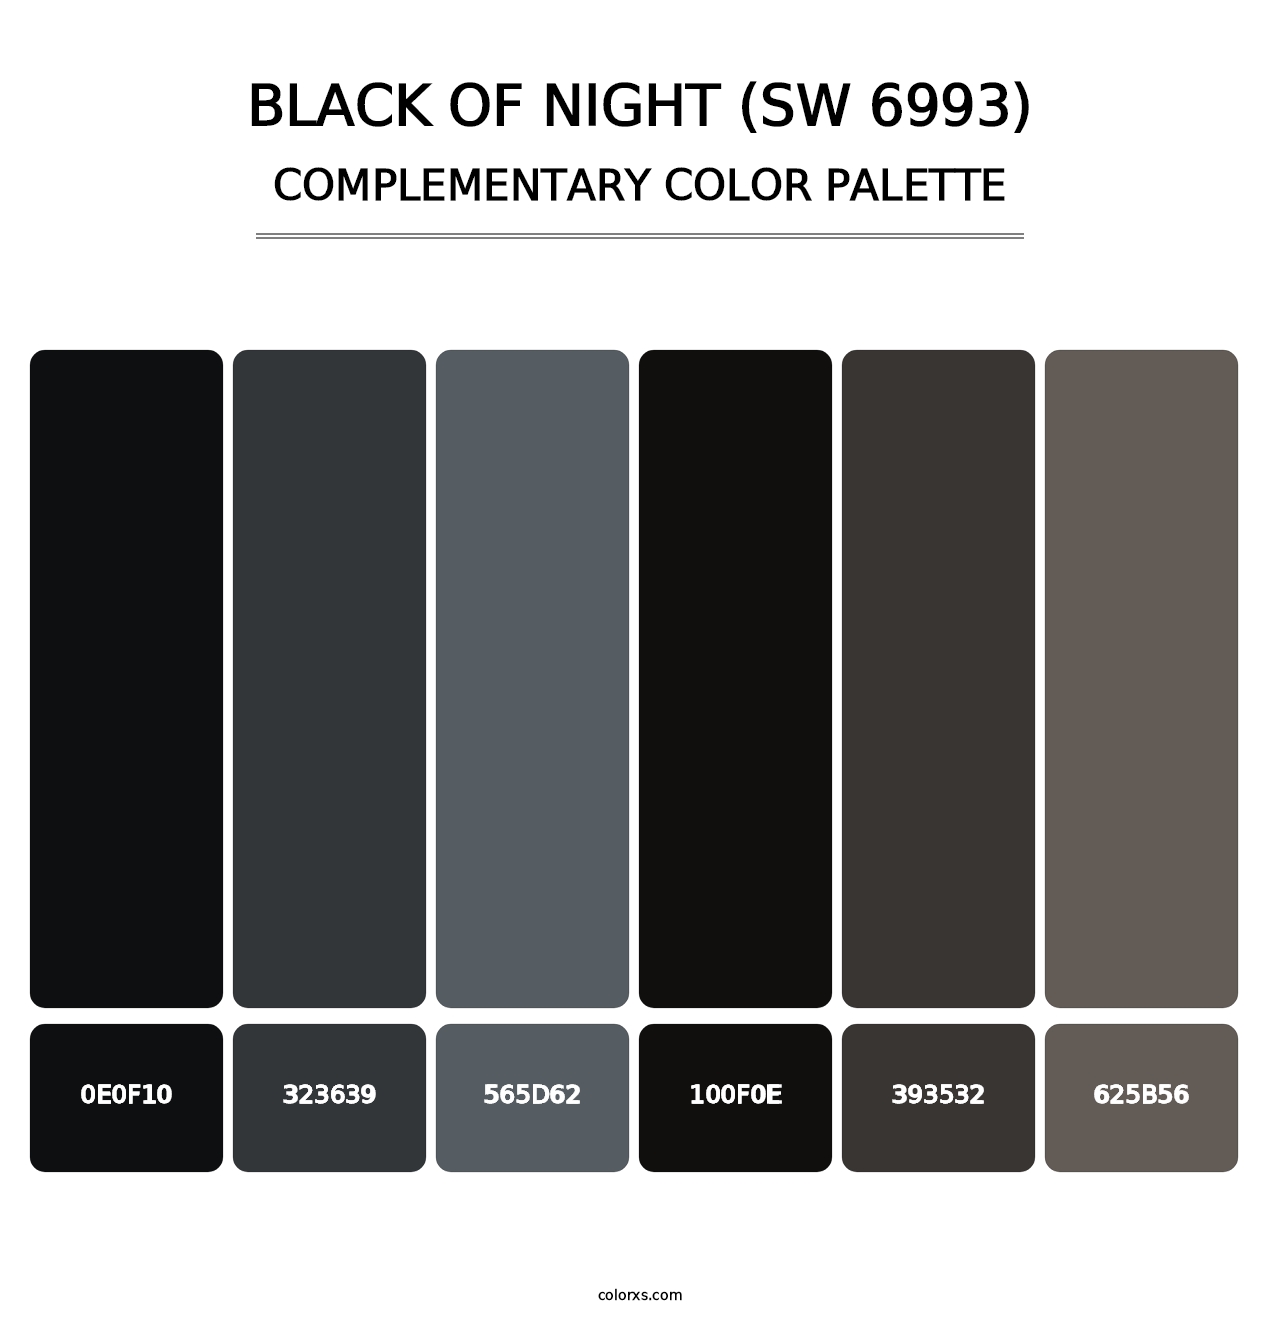 Black of Night (SW 6993) - Complementary Color Palette